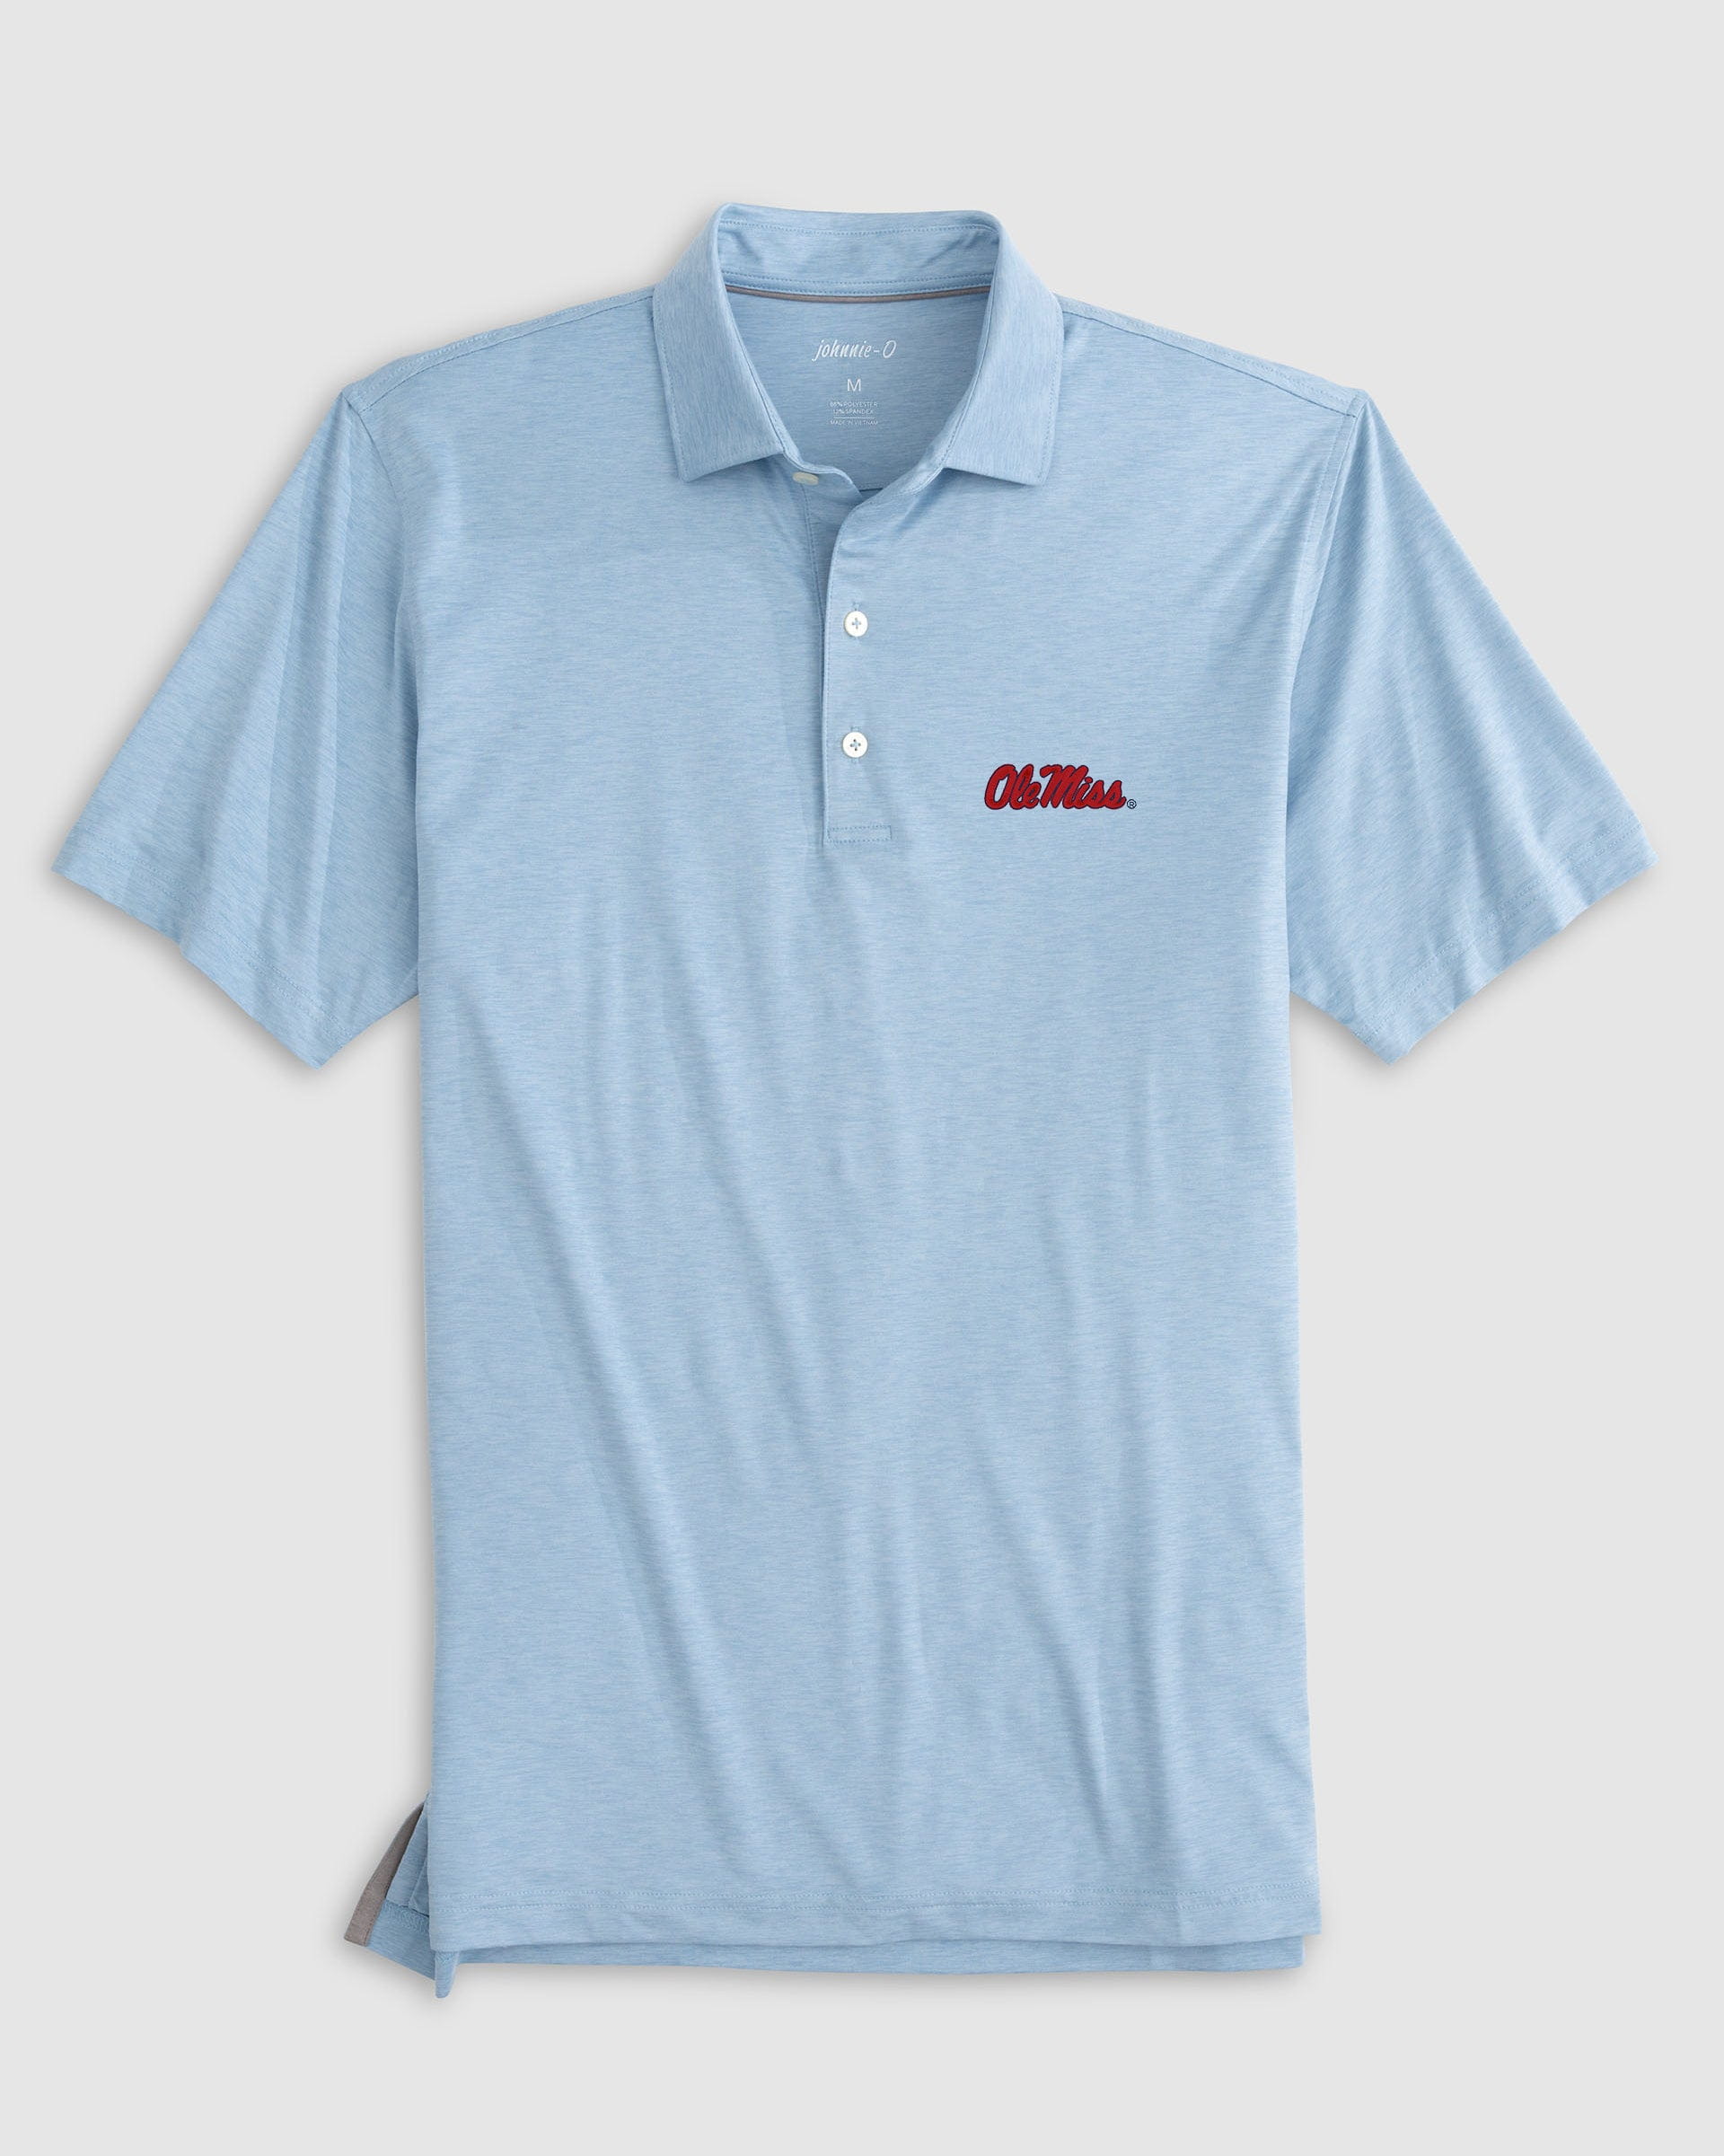 Ole Miss Huron Featherweight Performance Polo